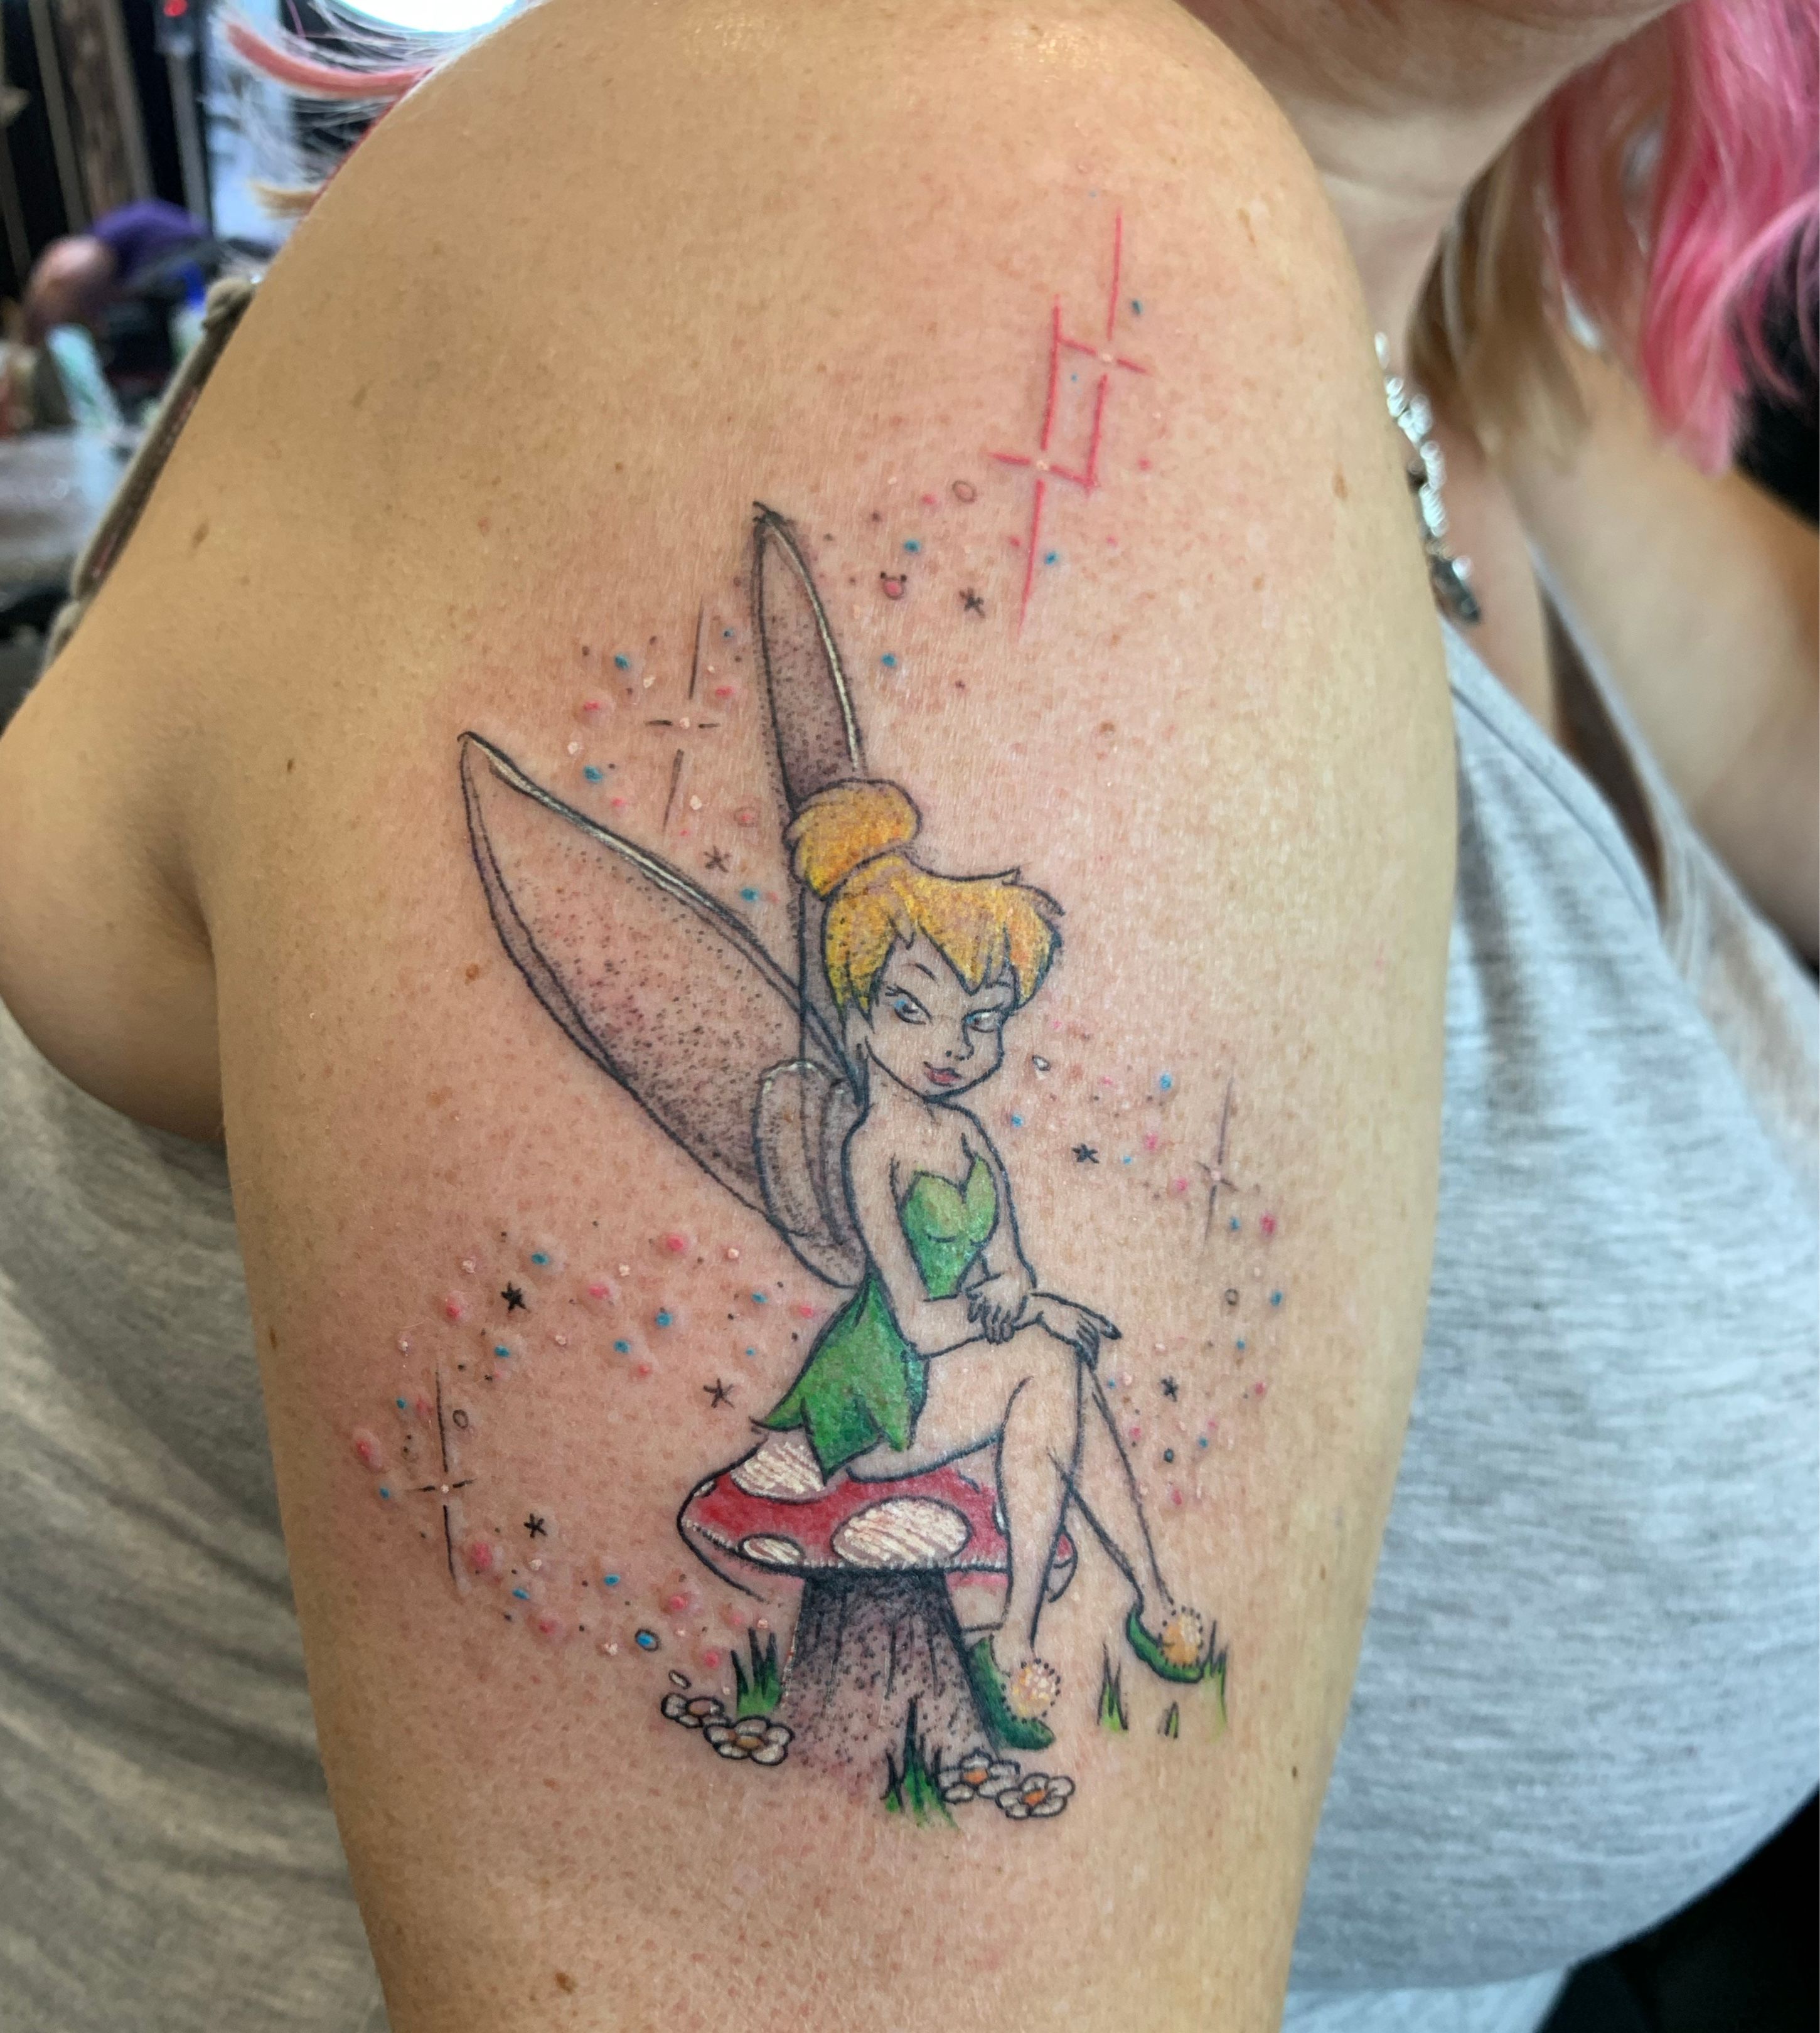 Watercolor Tinker Bell and believe tattoo on the